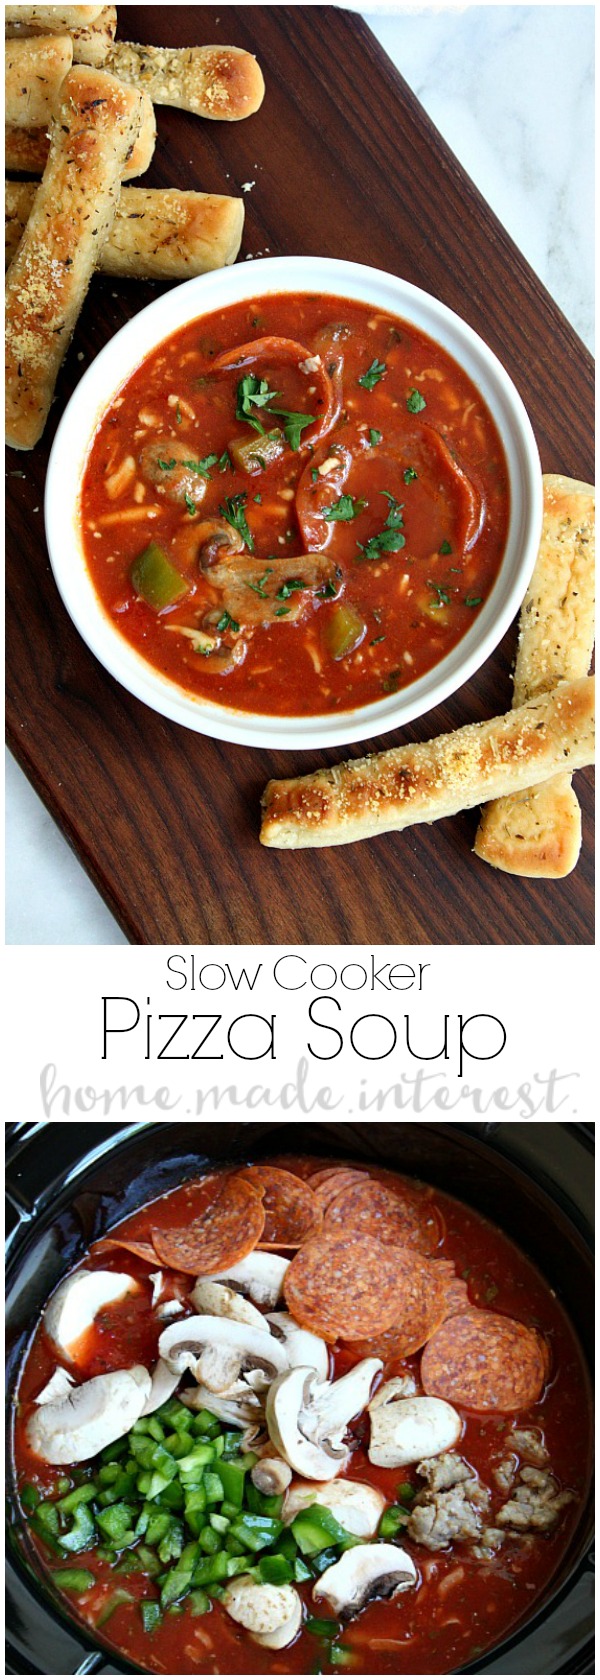 Put a new twist on family pizza night with this easy slow cooker soup recipe. Slow cooker pizza soup is a delicious crock pot tomato soup with all of the spices that give it that pizza sauce flavor. Add in stringy mozzarella cheese, and all of your favorite pizza toppings and you have a slow cooker soup recipe that the whole family will love. 